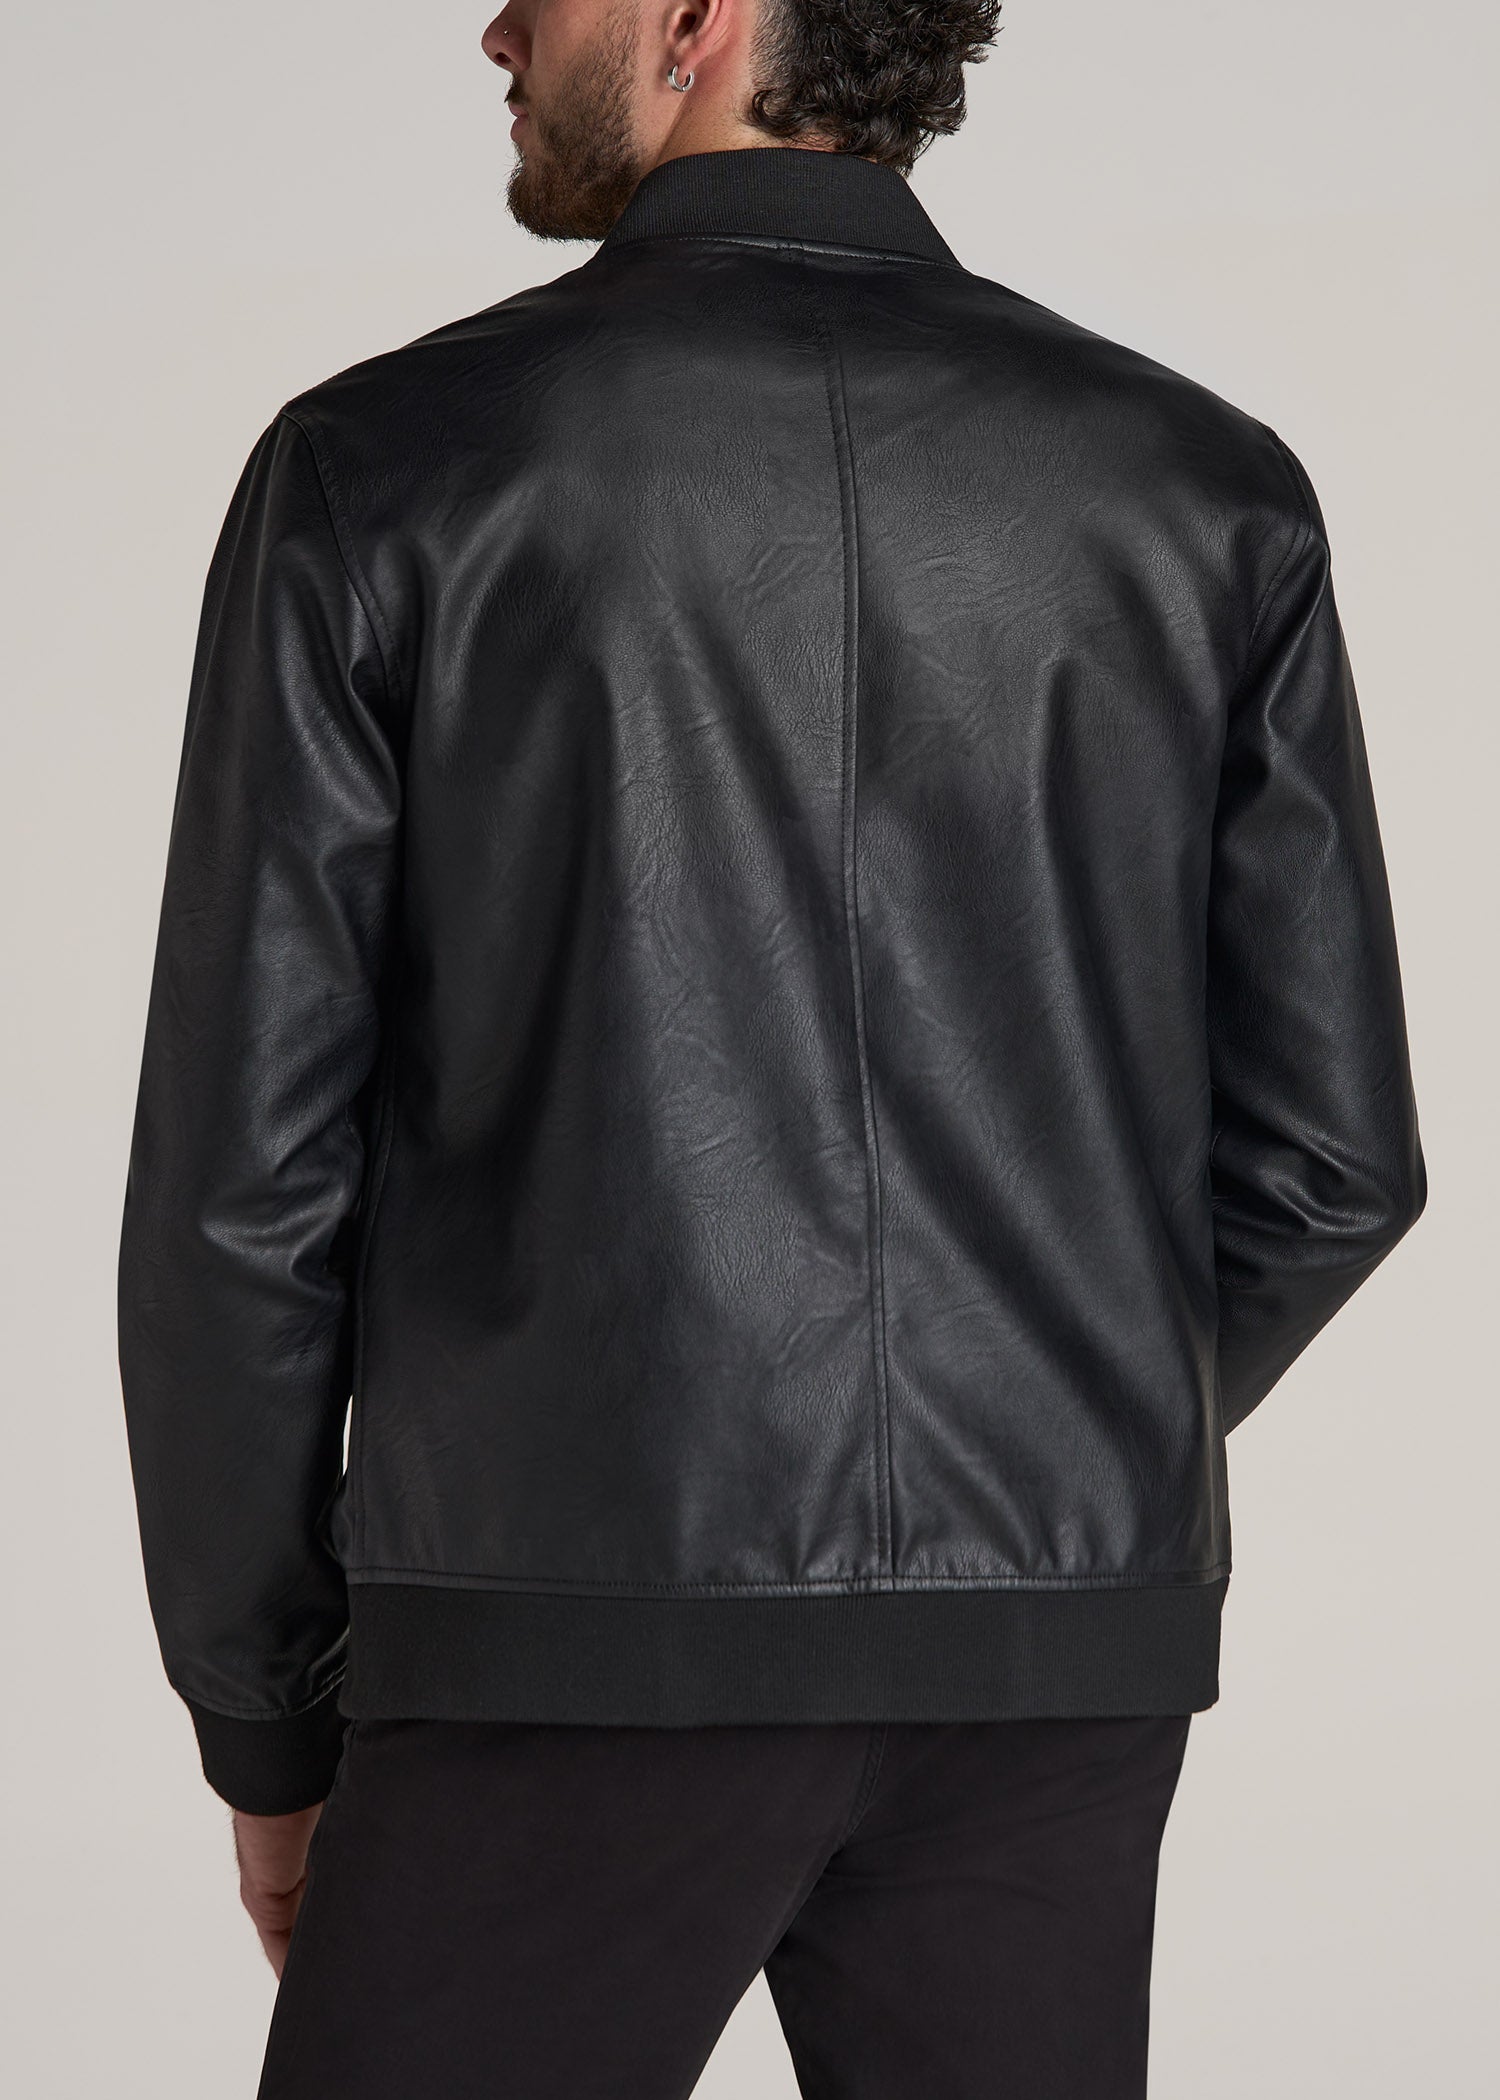 American-Tall-Men-Faux-Leather-Bomber-Jacket-Black-back